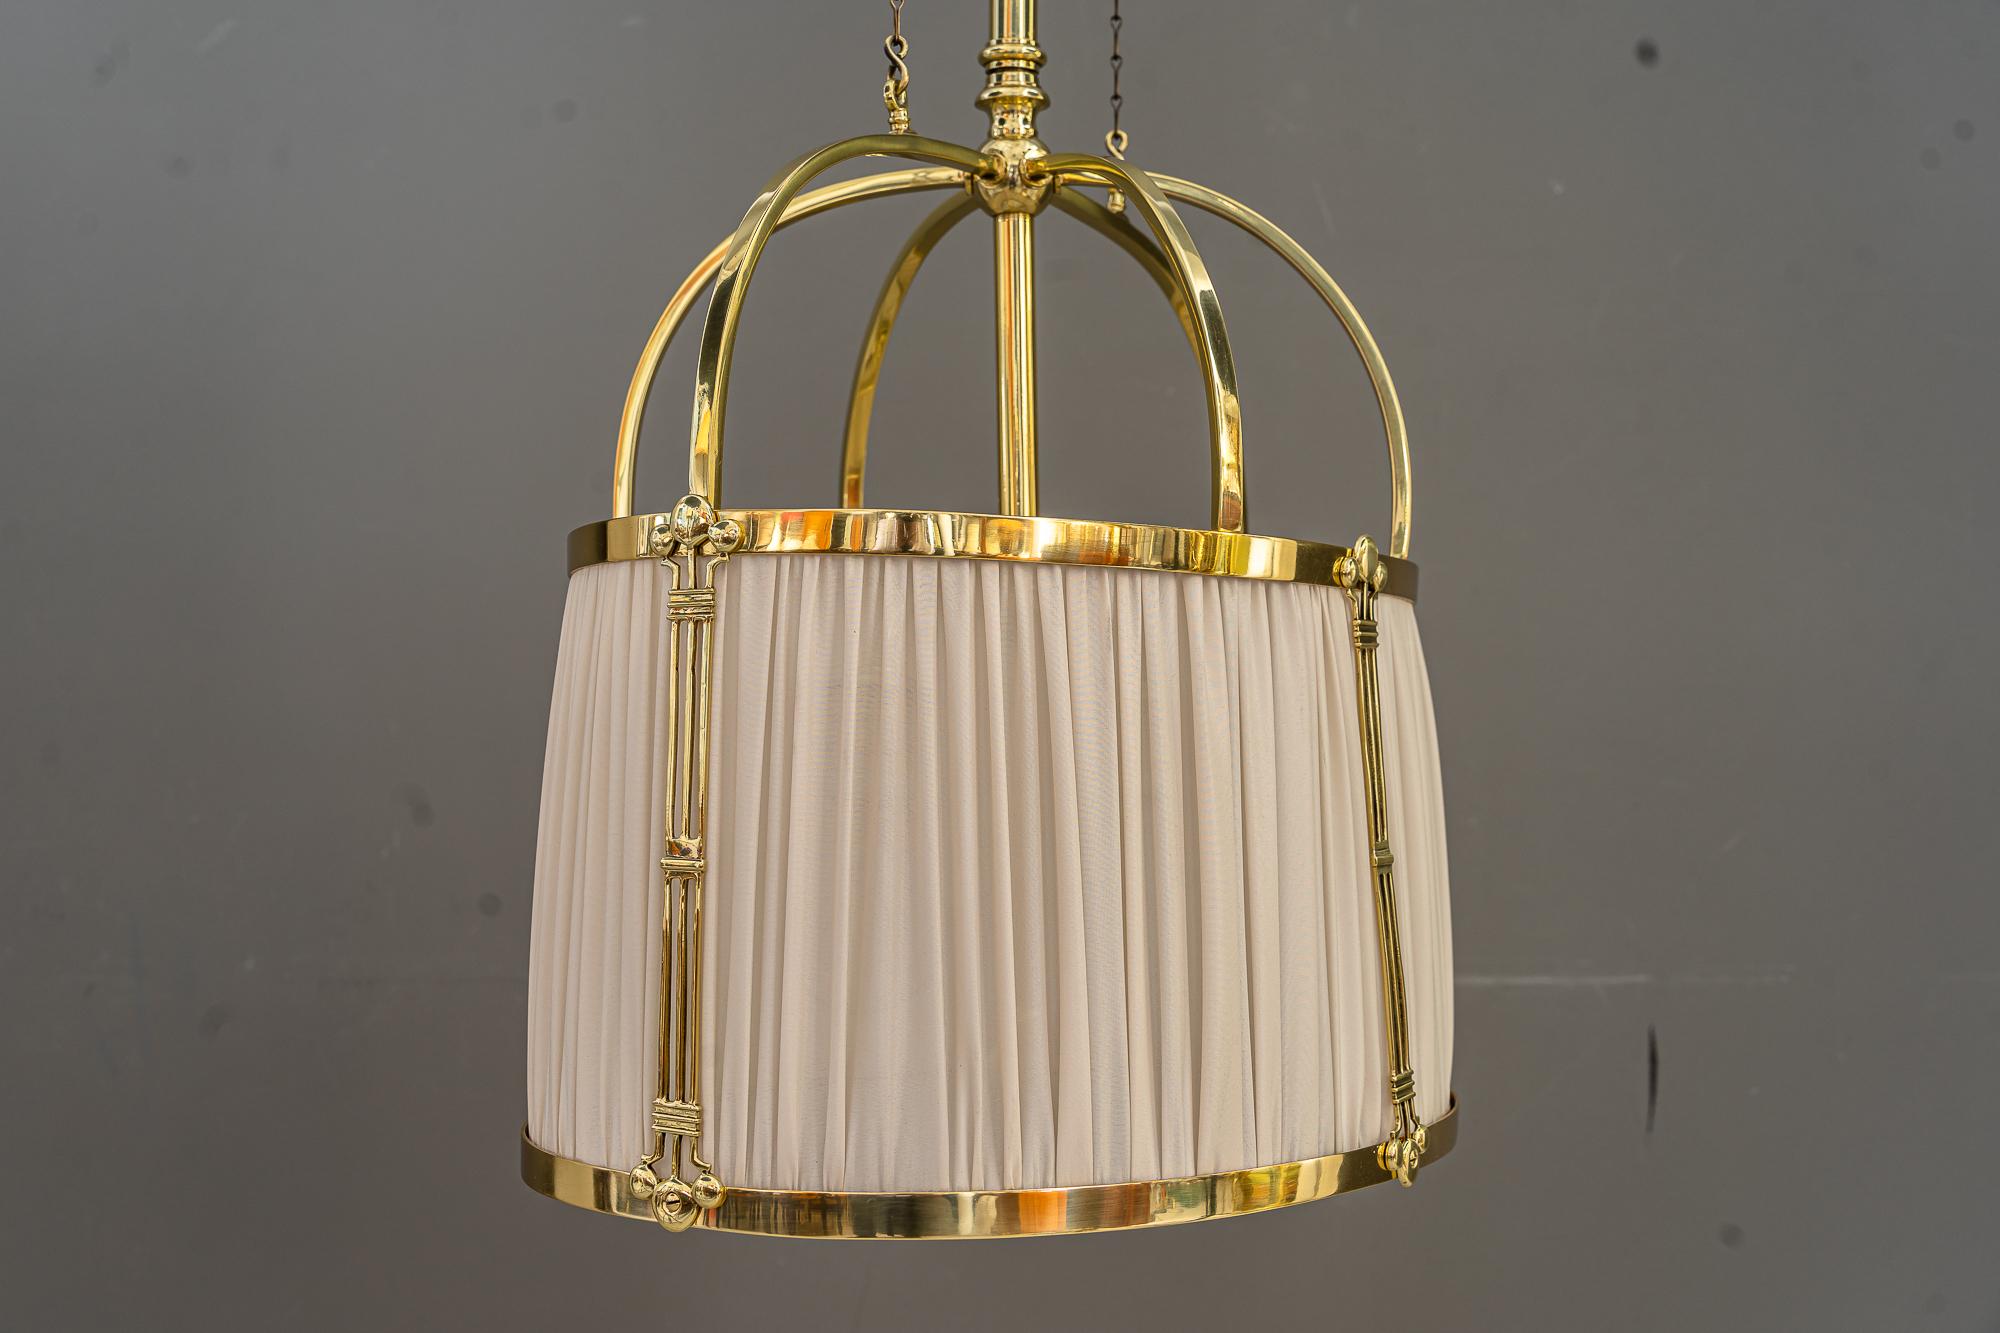 Rare adjustable Art Deco chandelier with fabric shade around 1920s
The fabric is replaced
Brass polished and stove enameled
Adjustable from 140cm - 165cm.